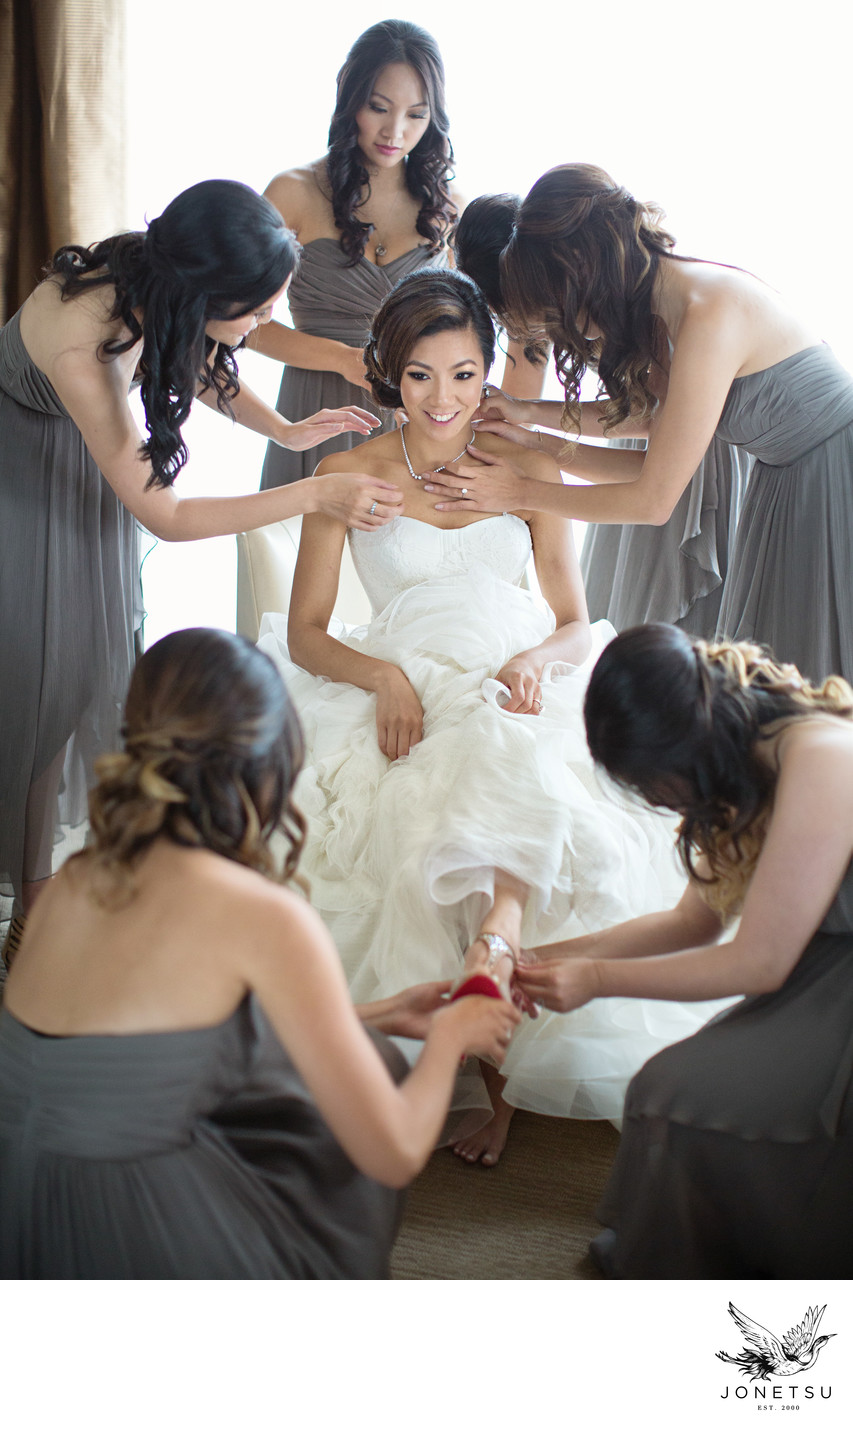 Vancouver bridesmaids in gowns help bride in Vera Wang